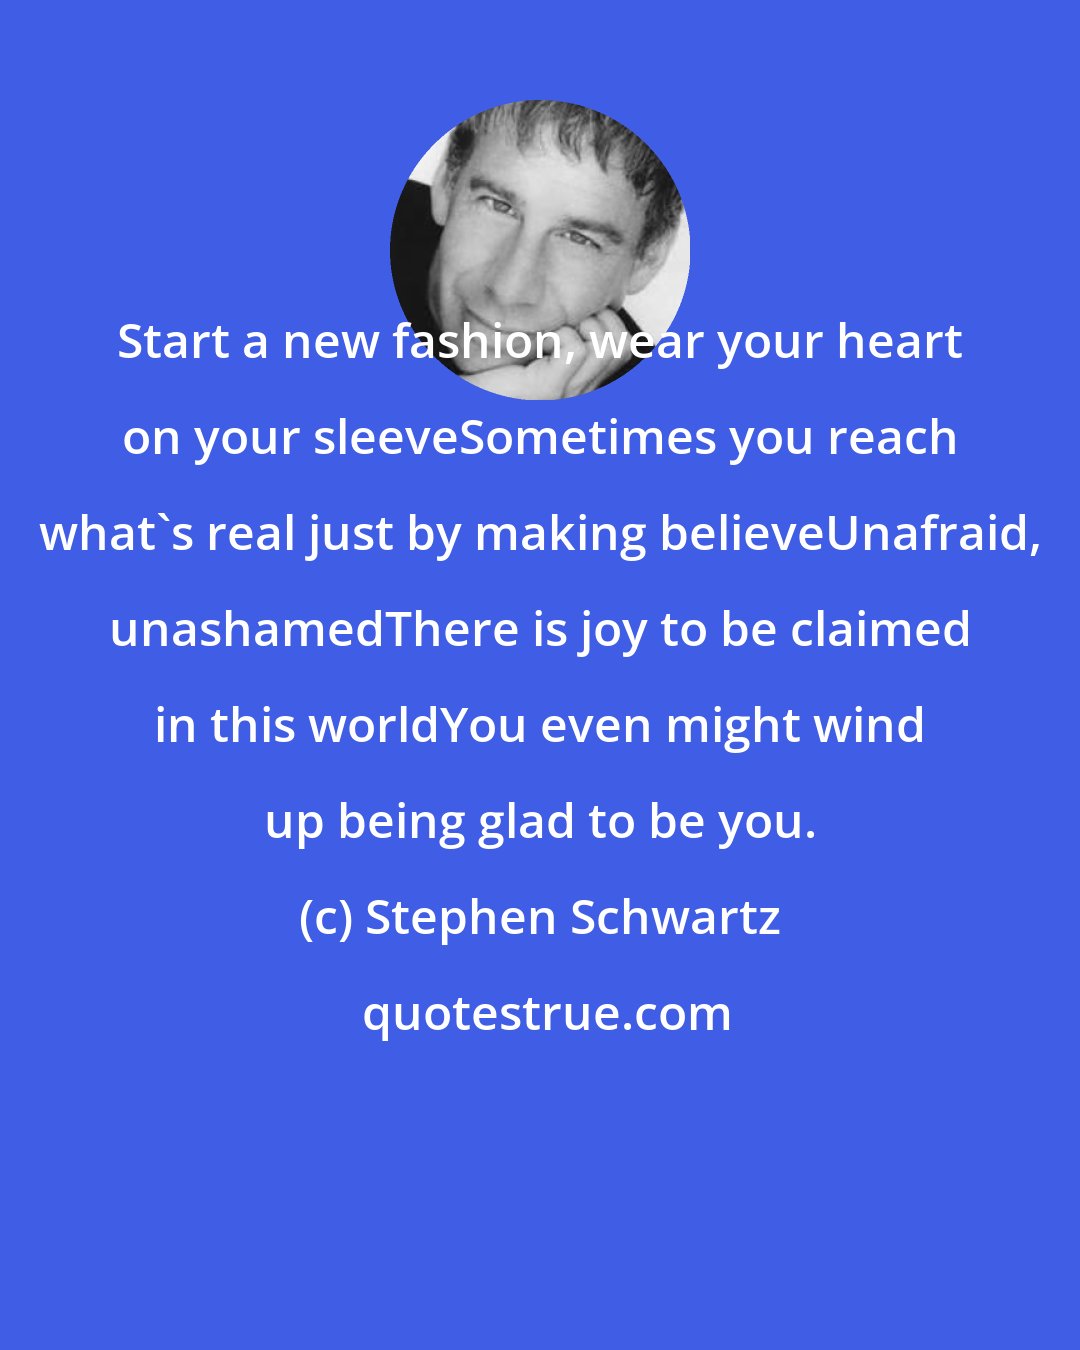 Stephen Schwartz: Start a new fashion, wear your heart on your sleeveSometimes you reach what's real just by making believeUnafraid, unashamedThere is joy to be claimed in this worldYou even might wind up being glad to be you.